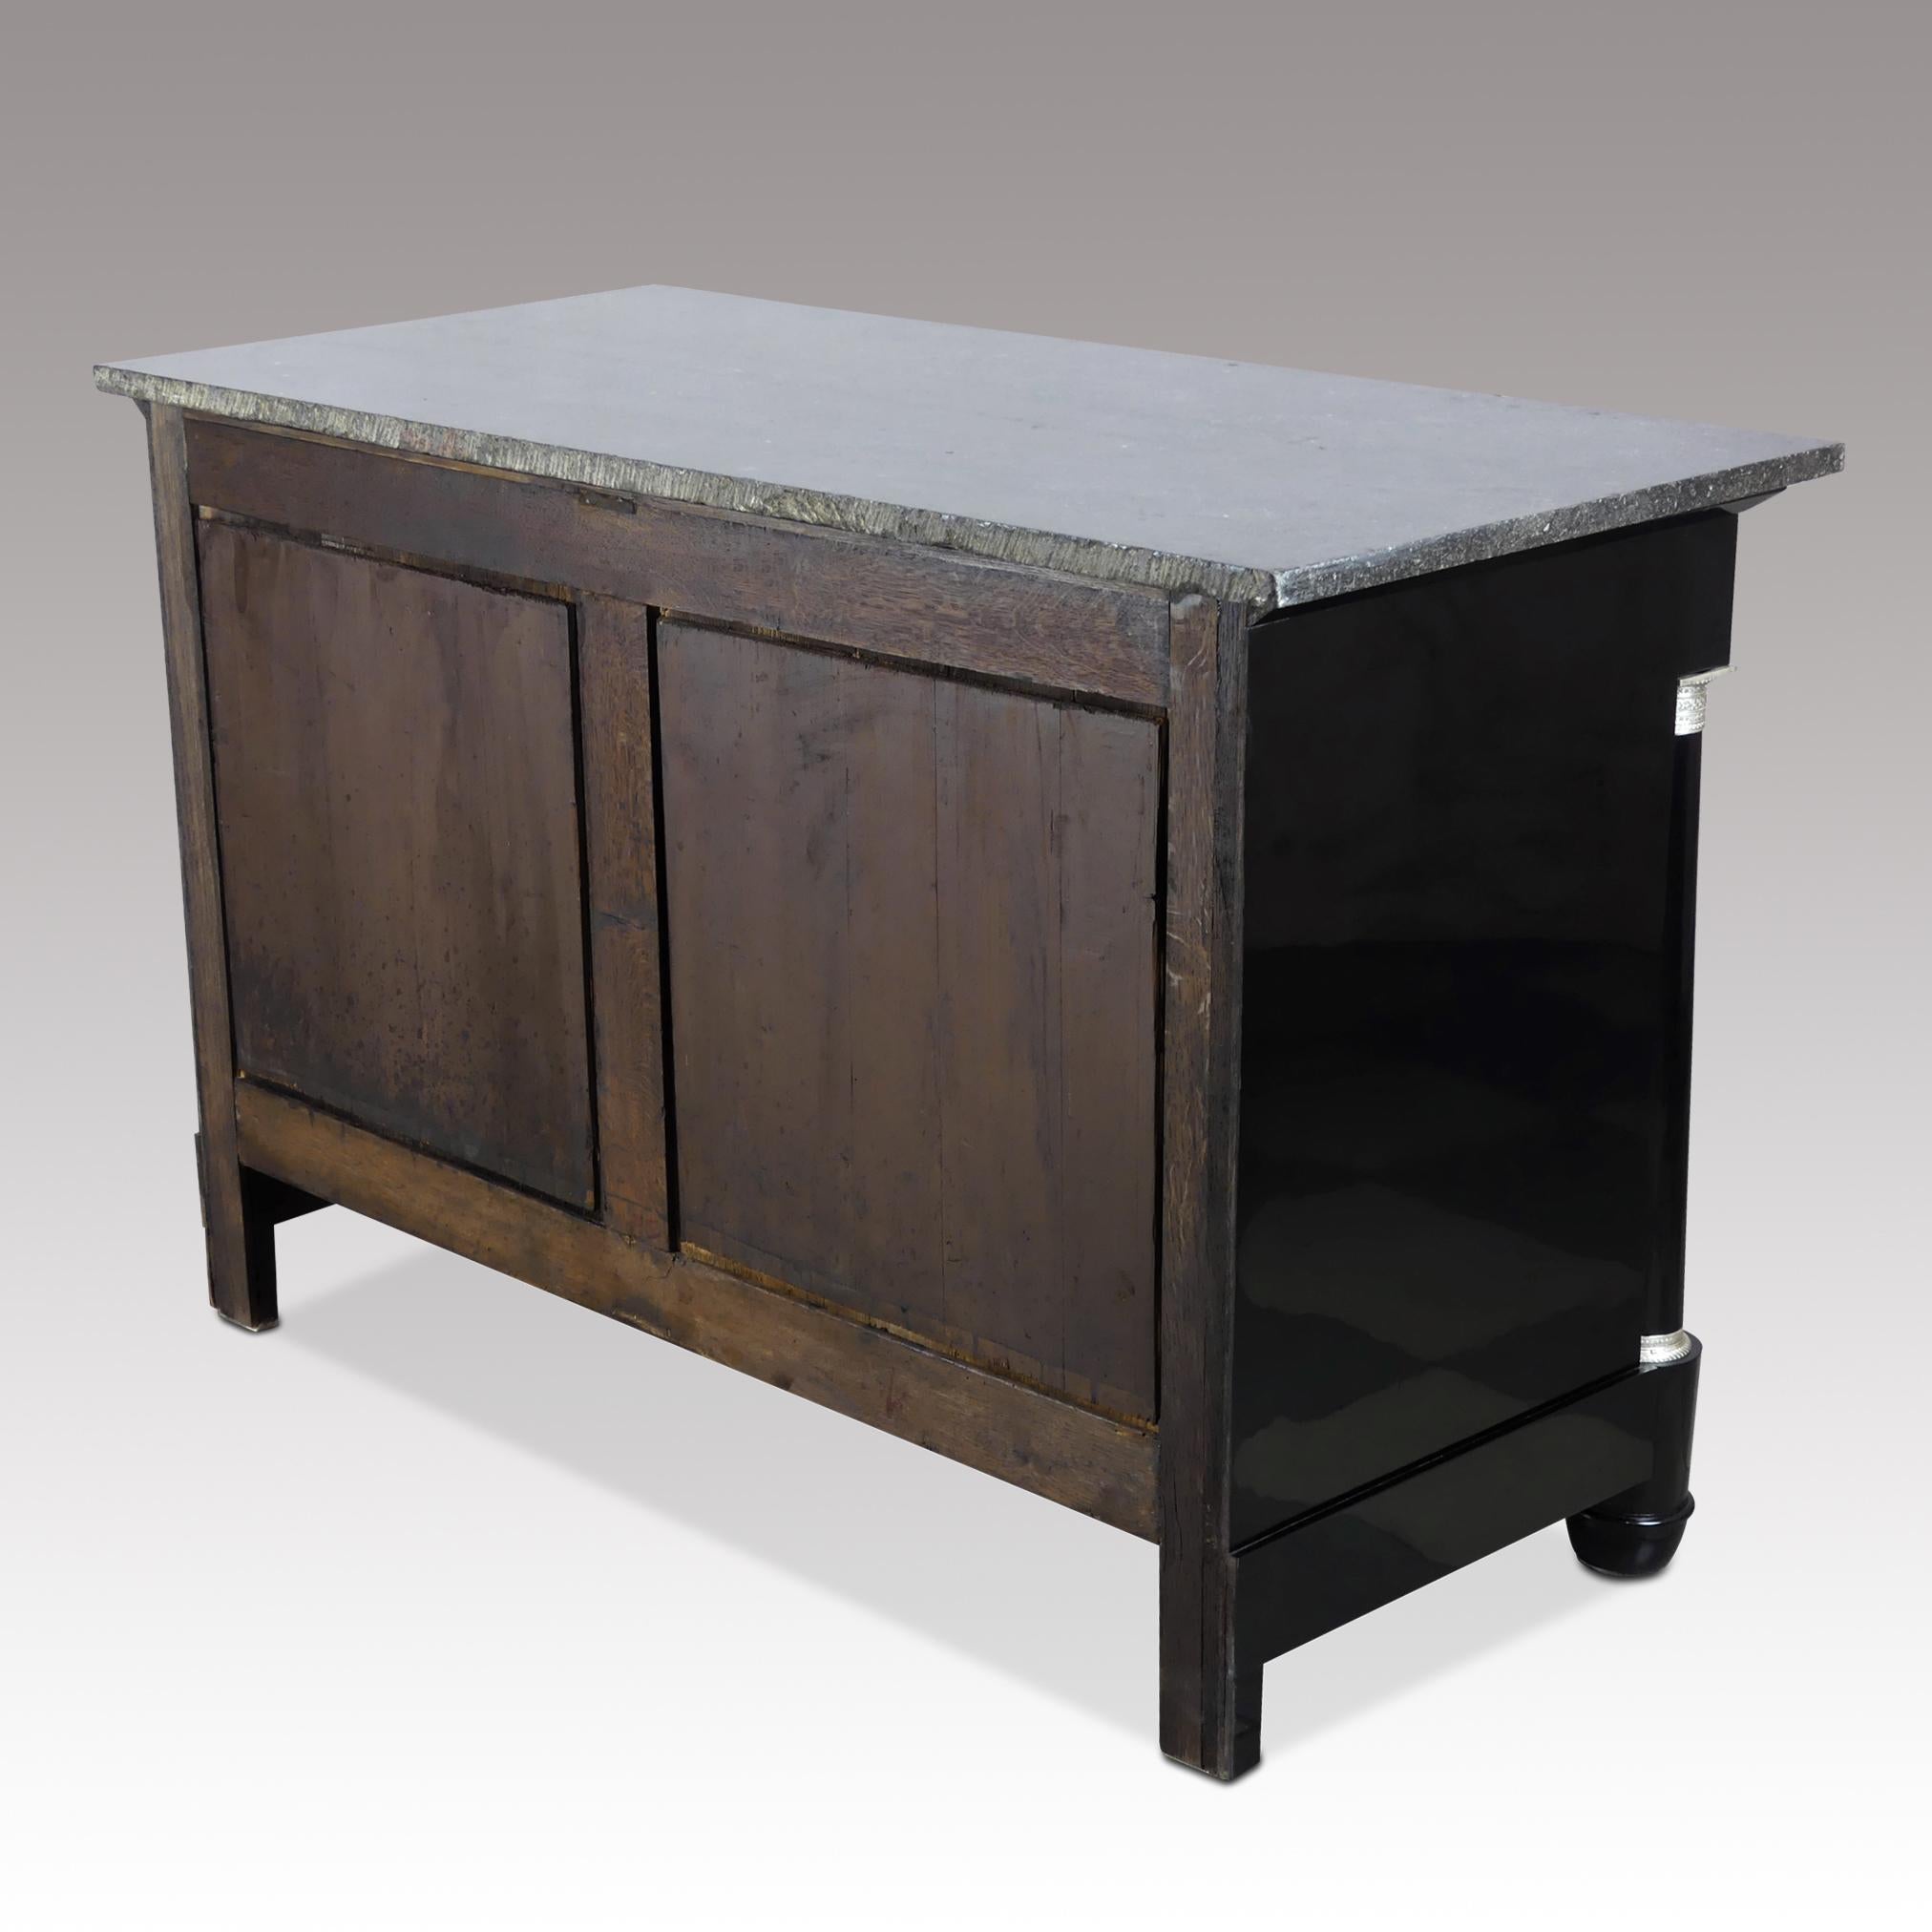 Mid-19th Century Black Ebonized French Empire Chest of Drawers Silver-Plated Fitting, Marble Top